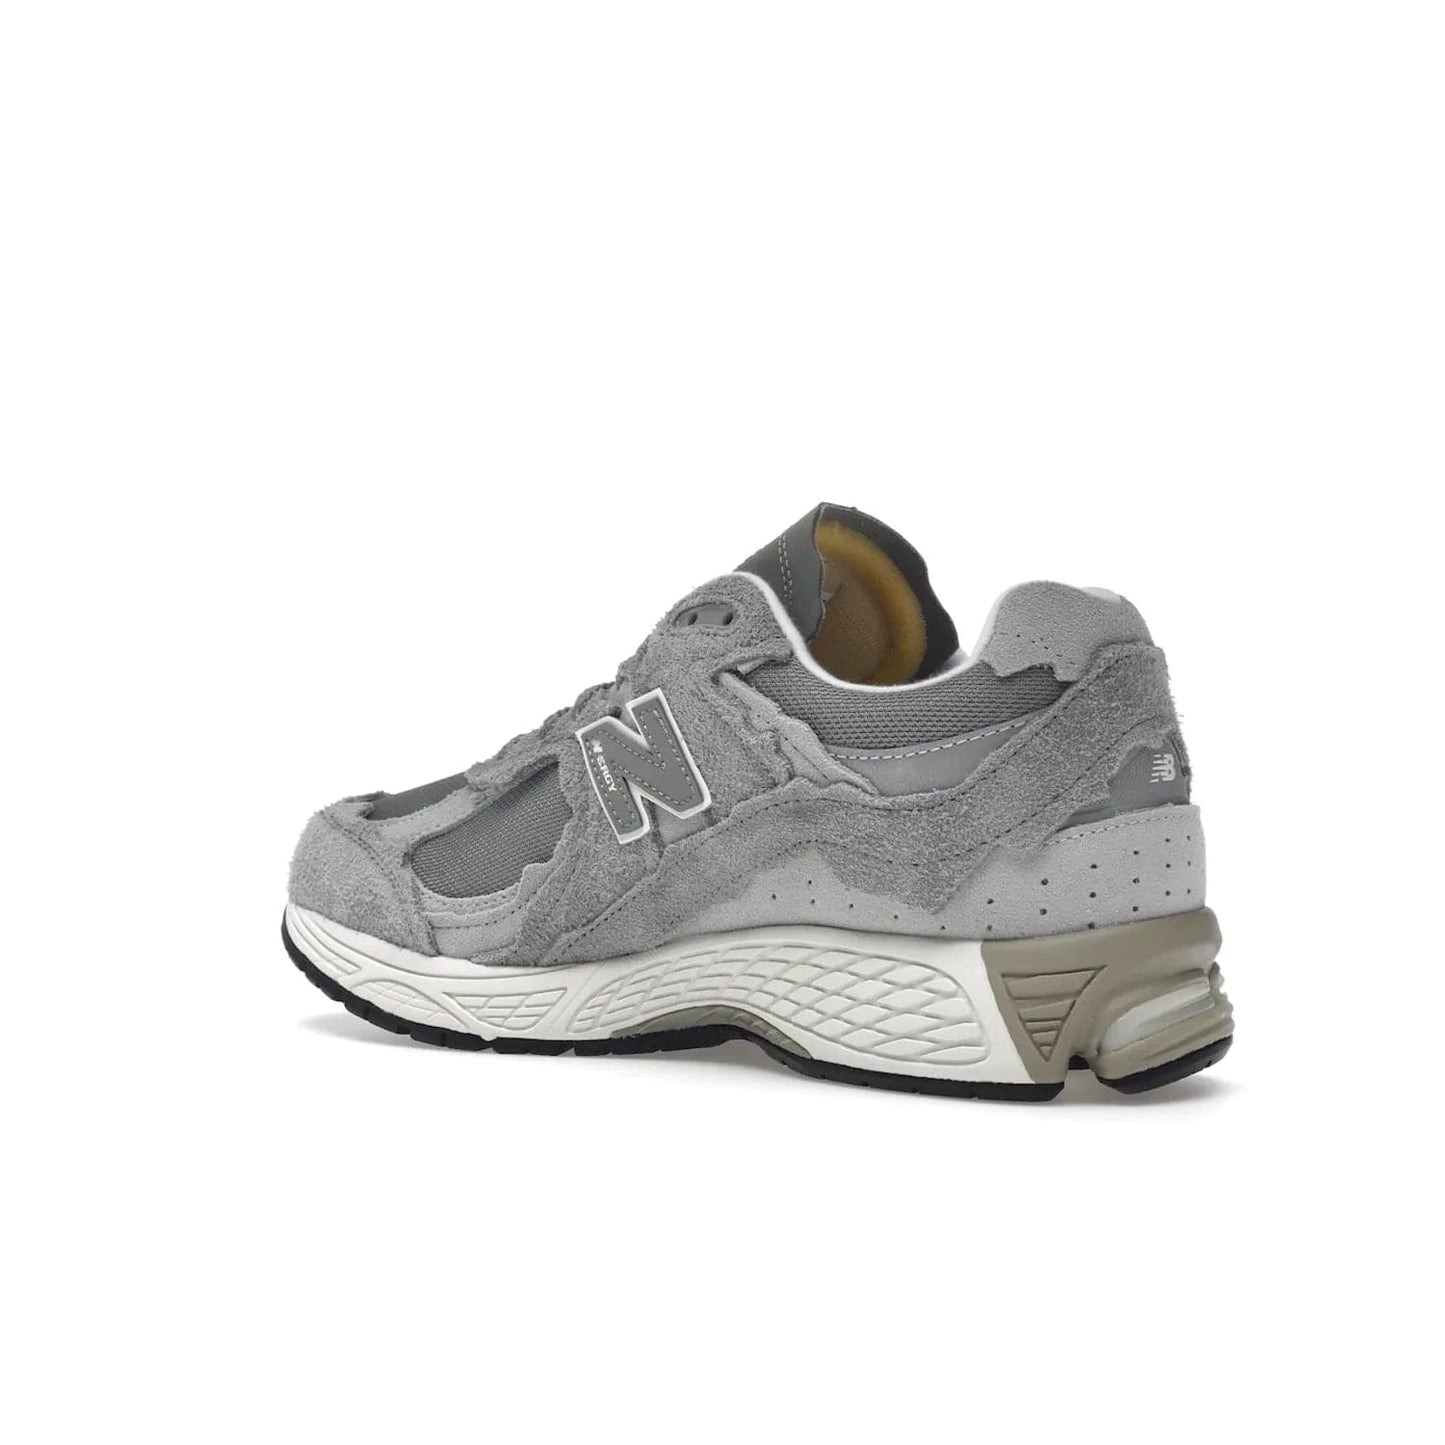 New Balance 2002R Protection Pack Grey - Image 23 - Only at www.BallersClubKickz.com - The New Balance 2002R Protection Pack Grey provides superior protection and all-day comfort. It features a blend of synthetic and mesh materials, foam midsole, rubber outsole, and a toe cap and heel counter. Show off the classic "N" logo and "2002R" lettering. Get a pair on February 14, 2023 for protection and style.